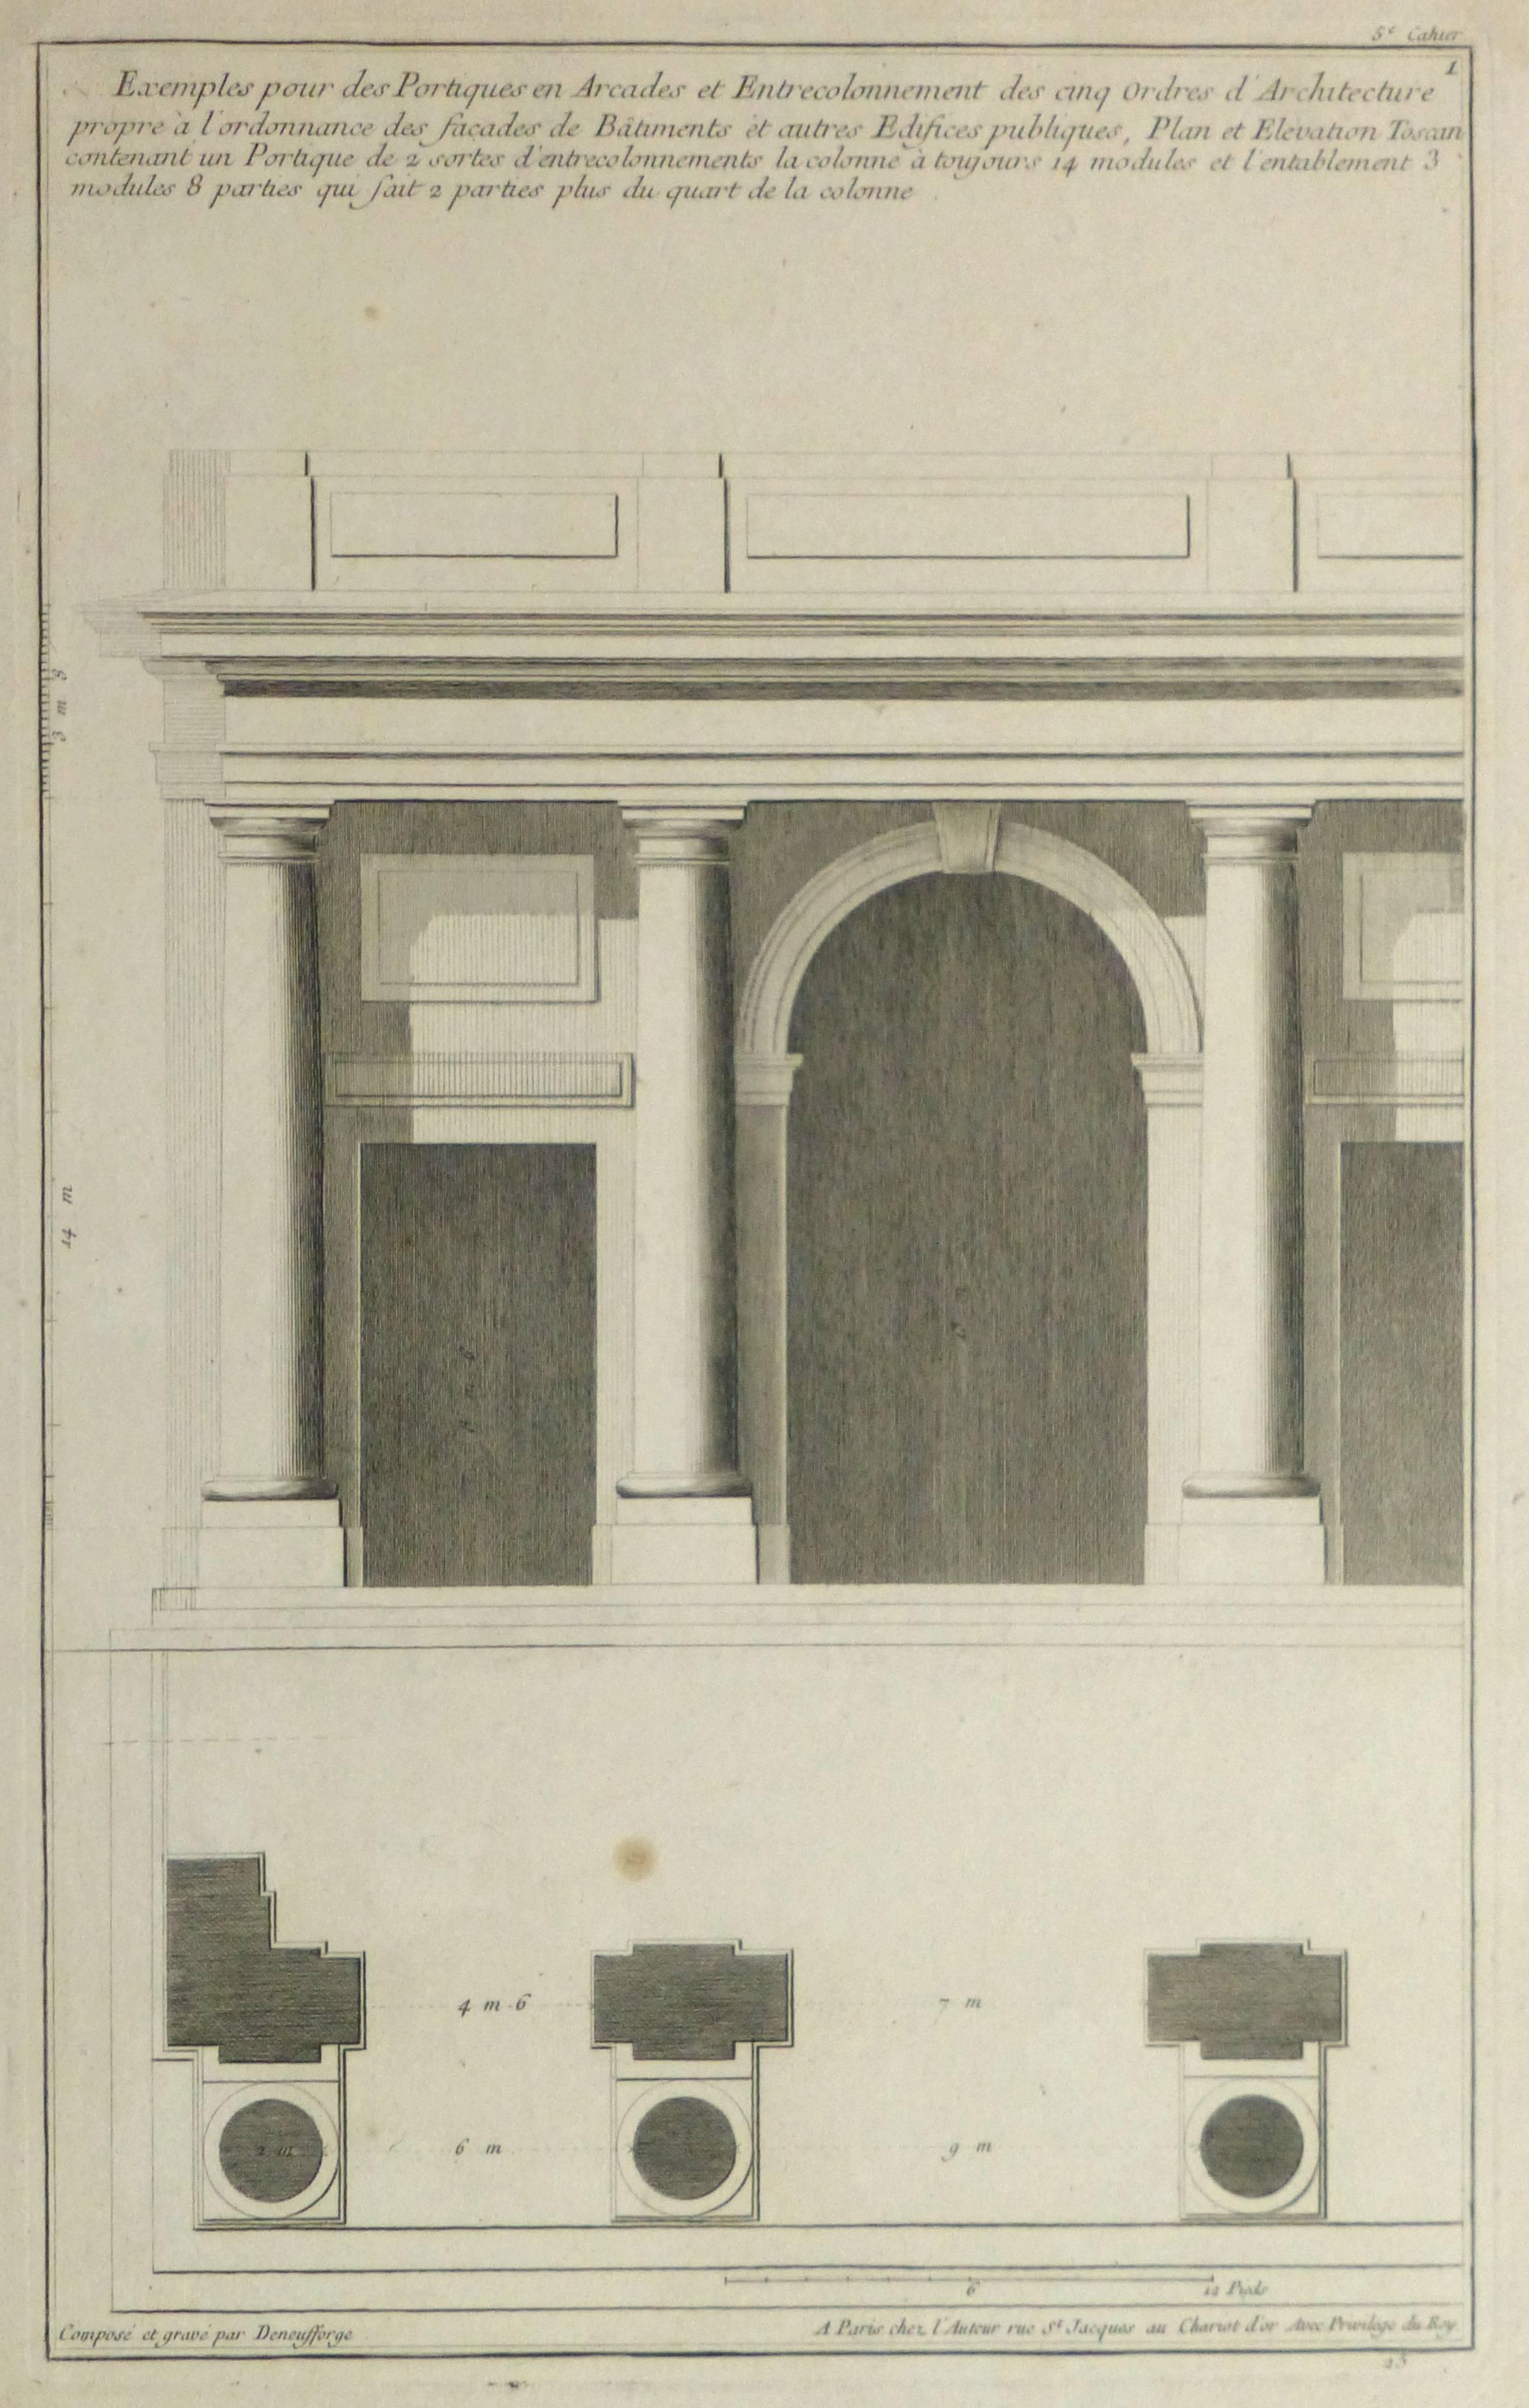 Unknown Interior Print - Antique French Copper Engraving - Portico Architectural Details